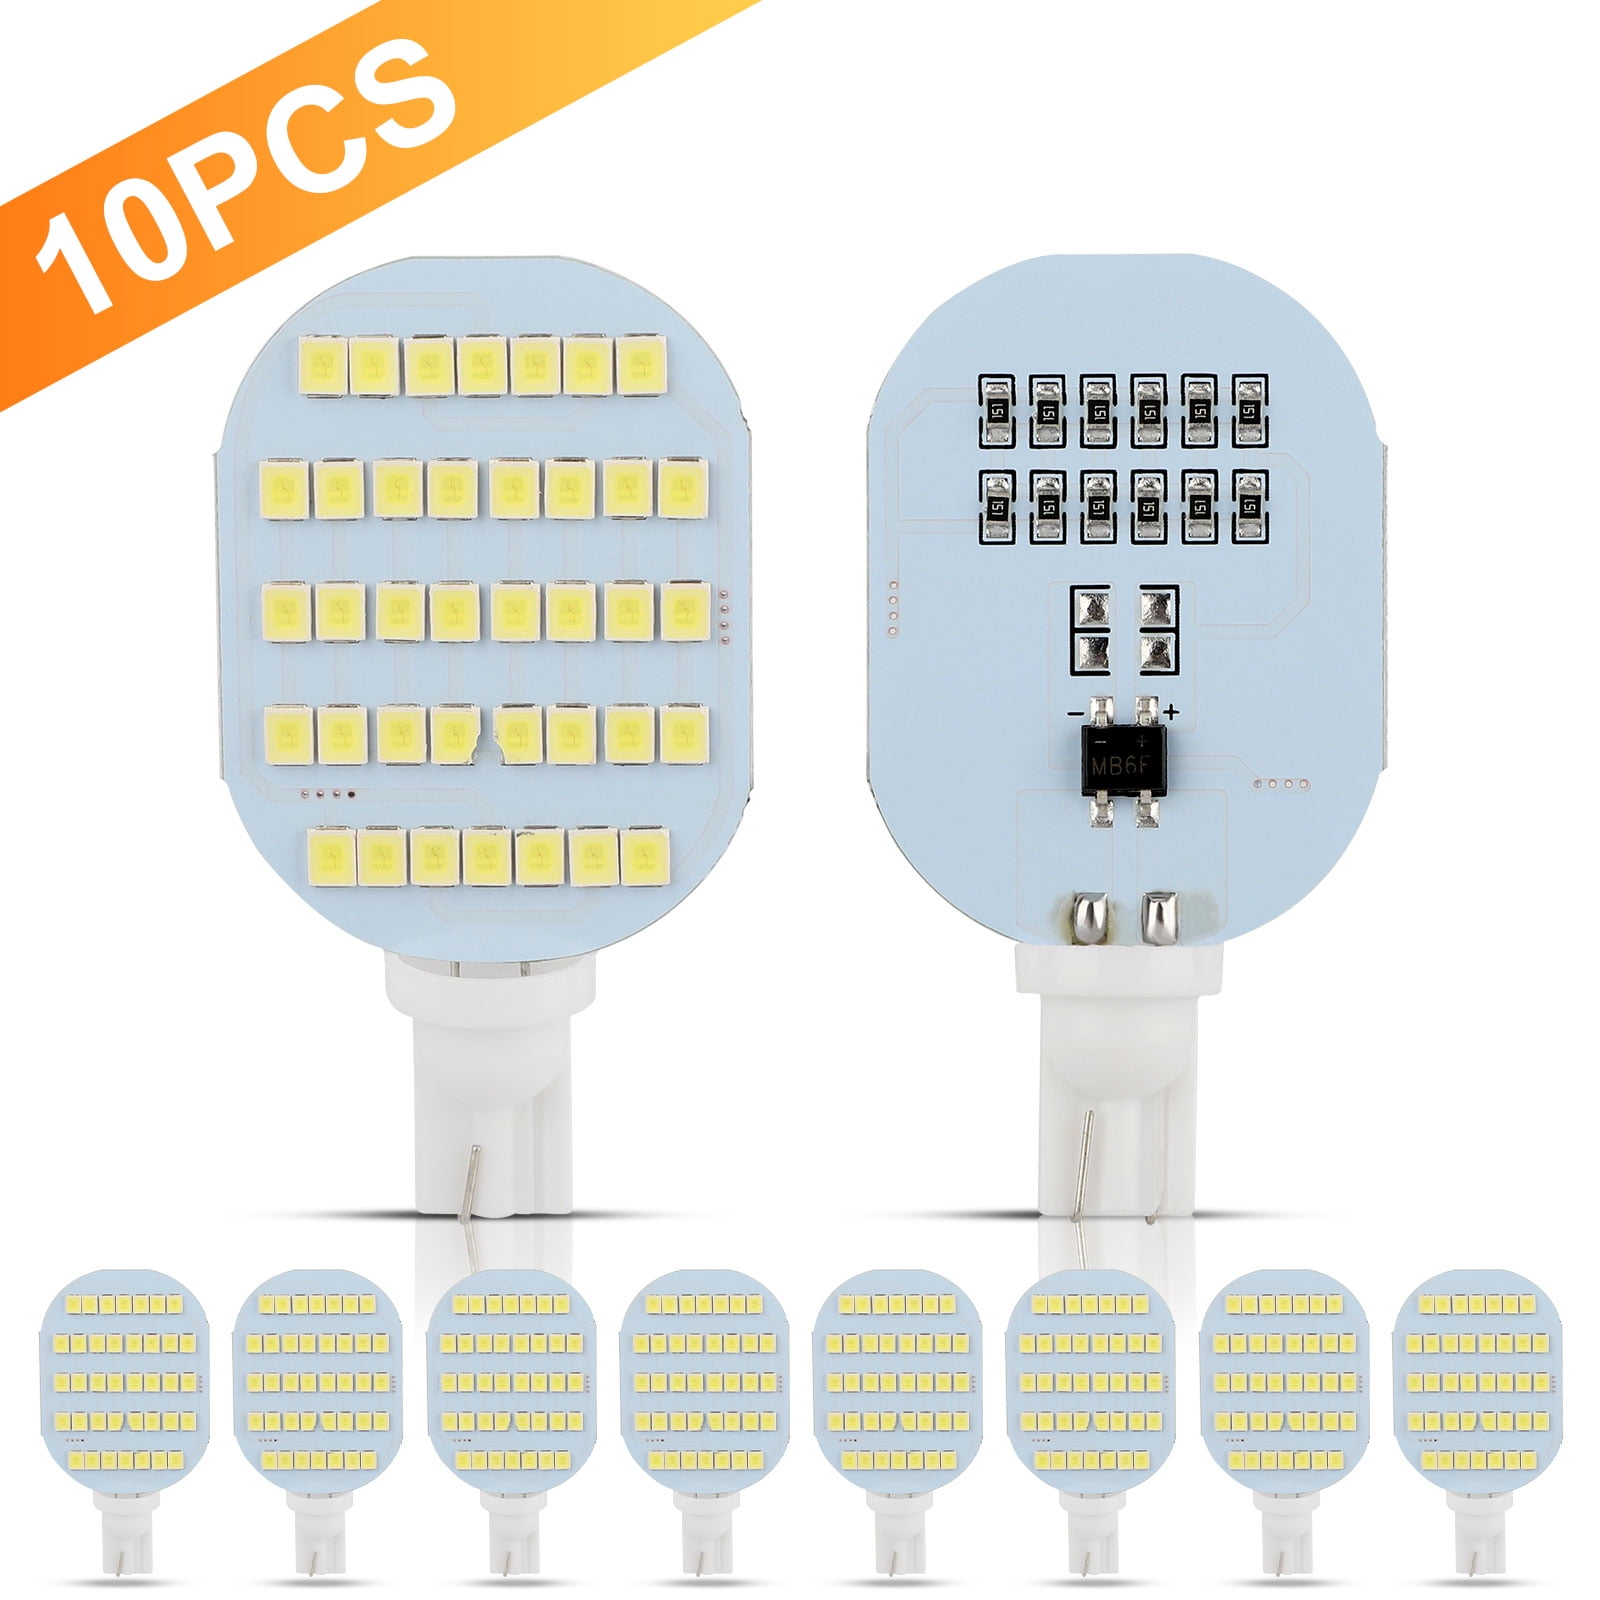 MUENING 10PCS 921 194 Interior LED Light Bulbs for RV，Super Bright 24SMD 2835 4000K White T10 912 922 904 194 LED Bulbs Replacement for Camper Trailer Motorhome Marine Boat Indoor Ceiling Dome Lights 